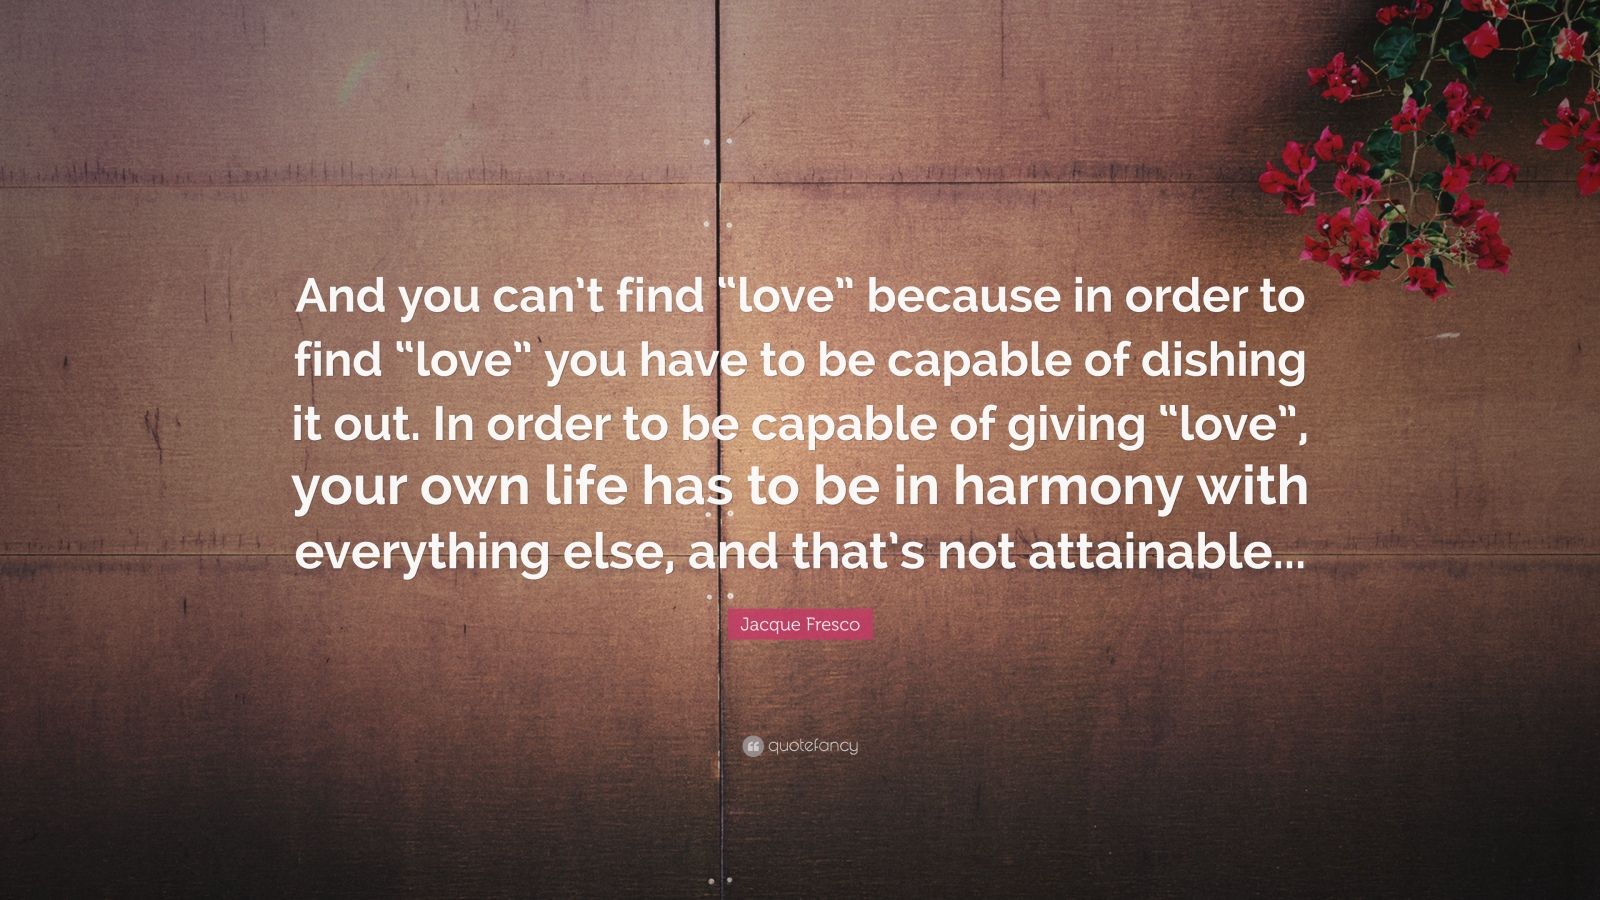 Jacque Fresco Quote “And you can t find “love” because in